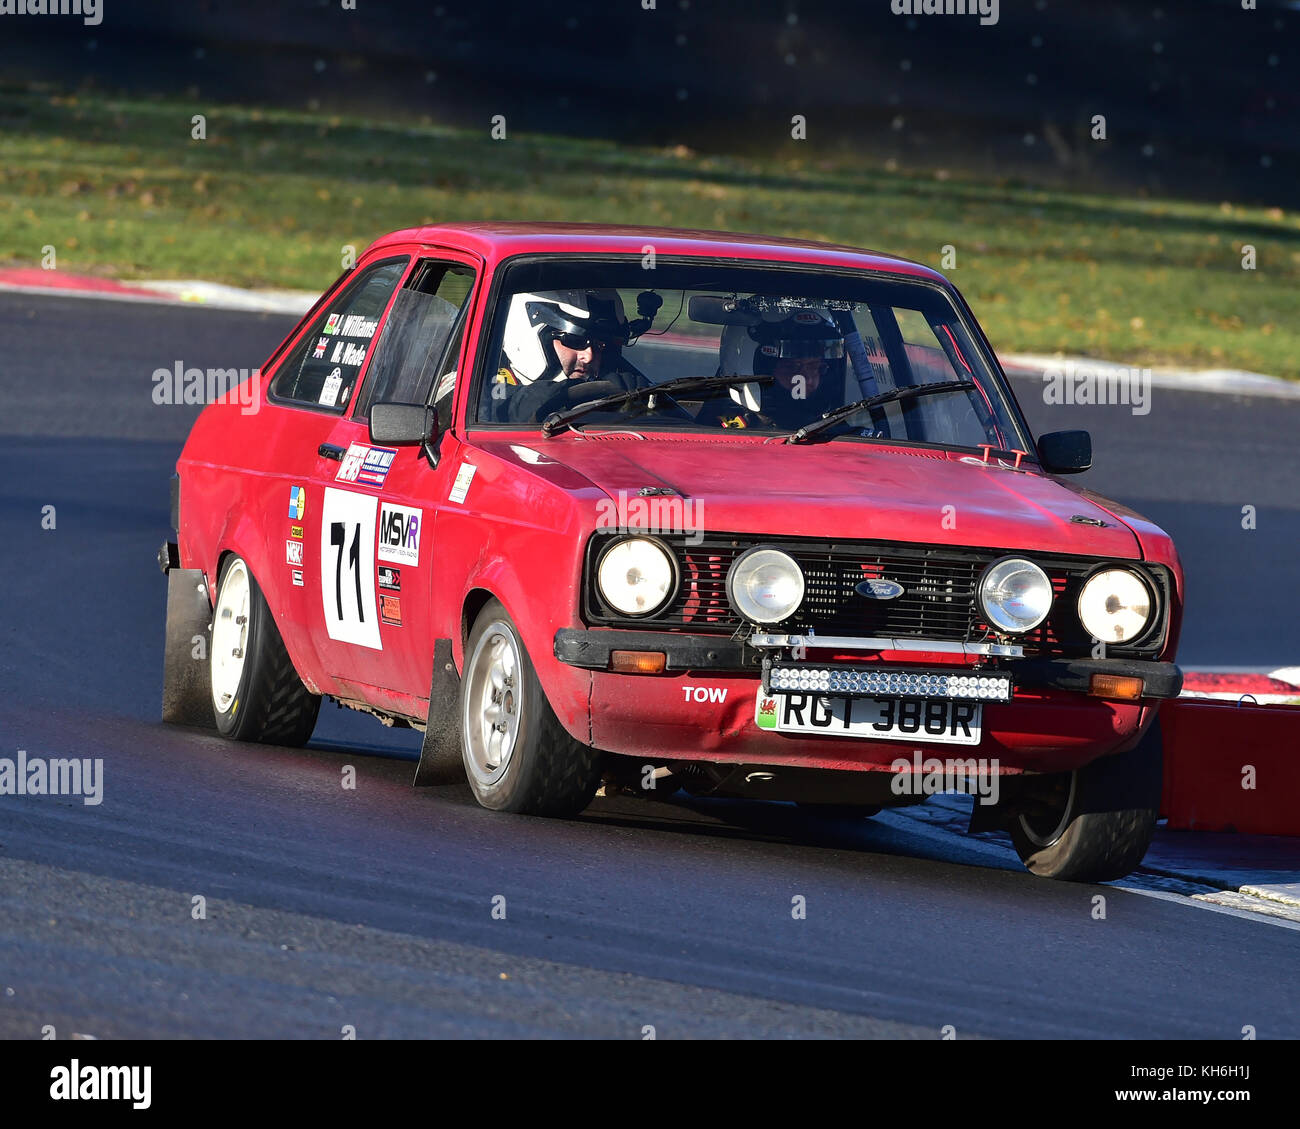 Jonathan Williams, Mark Wade, Ford Escort, MGJ Rally Stages, Chelmsford Motor Club, Brands Hatch,  Saturday, 21st January 2017, MSV, Rally, racing, ra Stock Photo